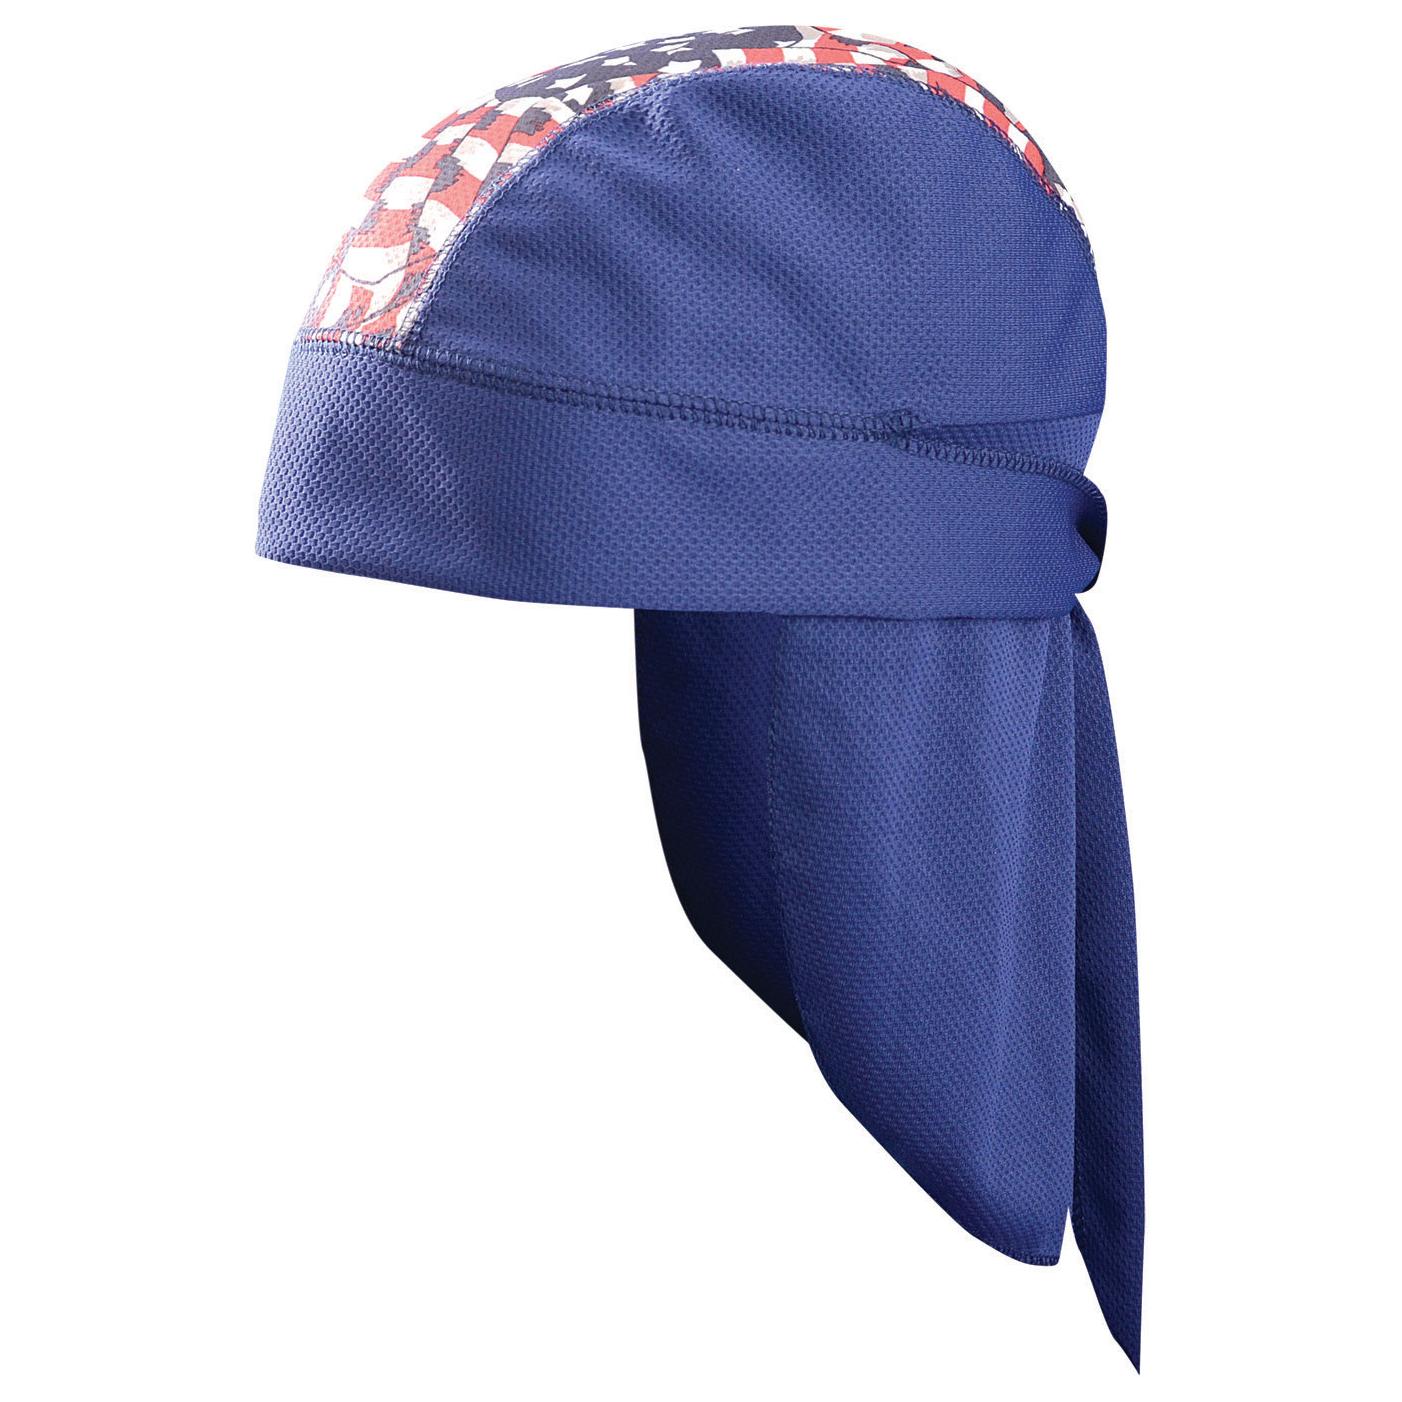 OccuNomix TD201 Wicking & Cooling Extended Neck Shade Skull Cap